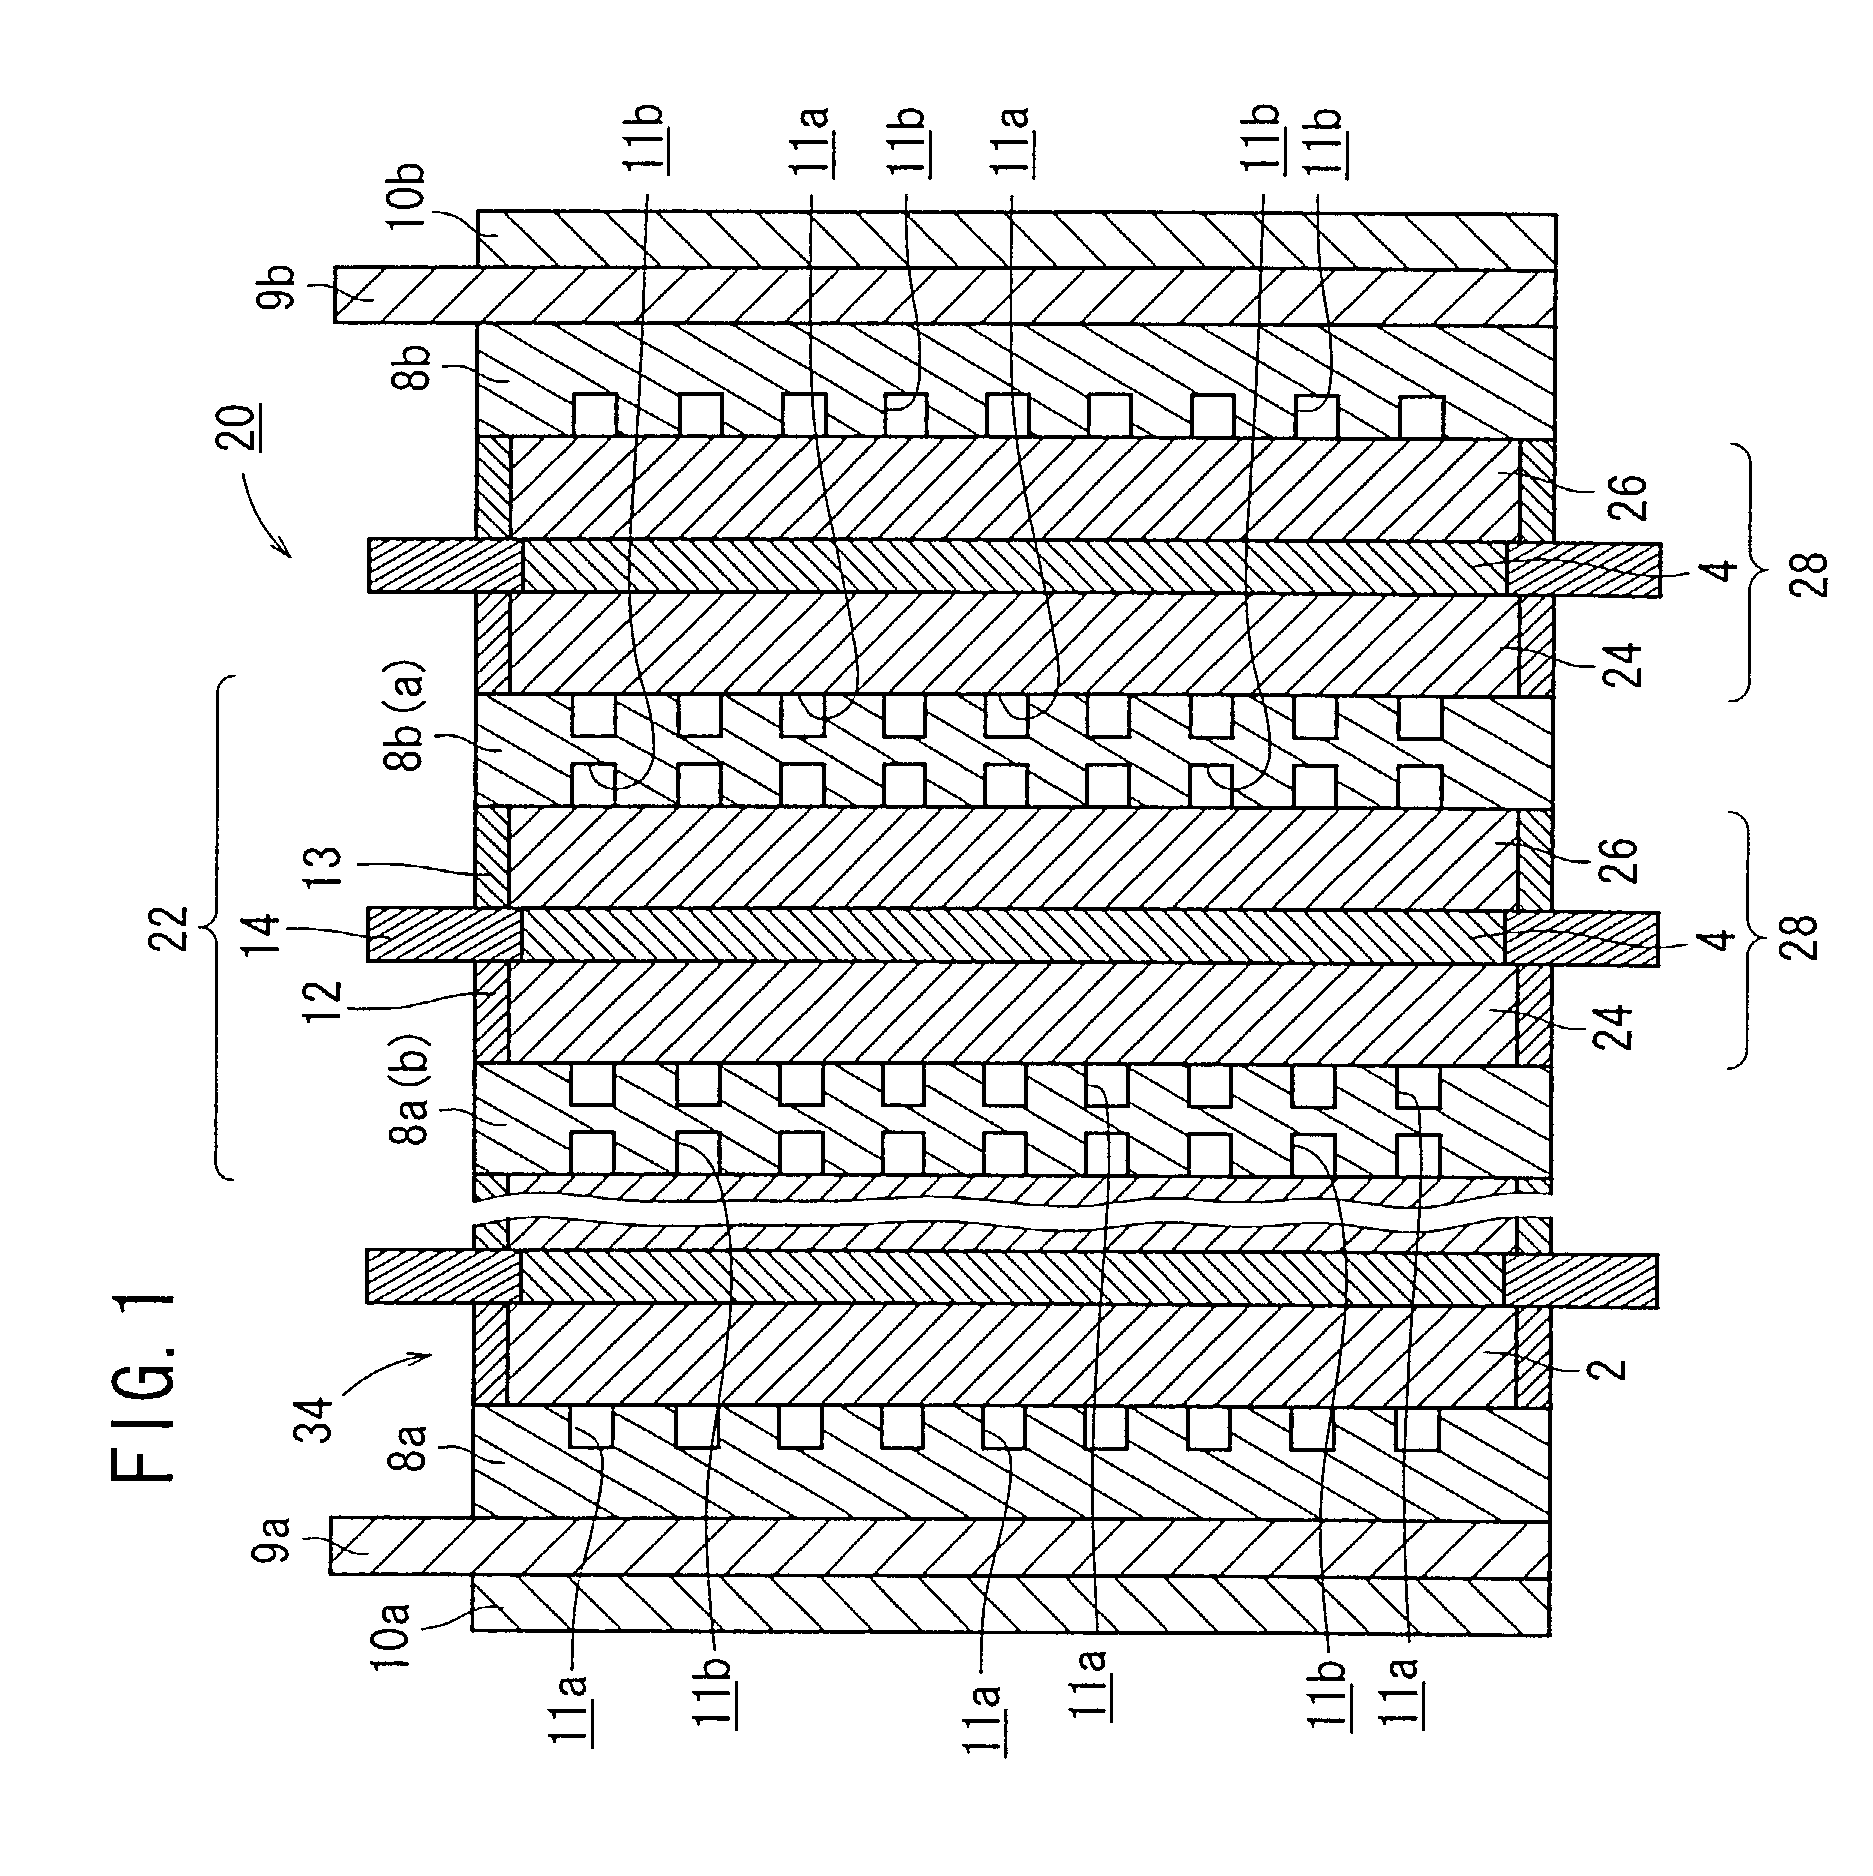 Electrode for fuel cell, method of manufacturing same, and fuel cell with such electrode